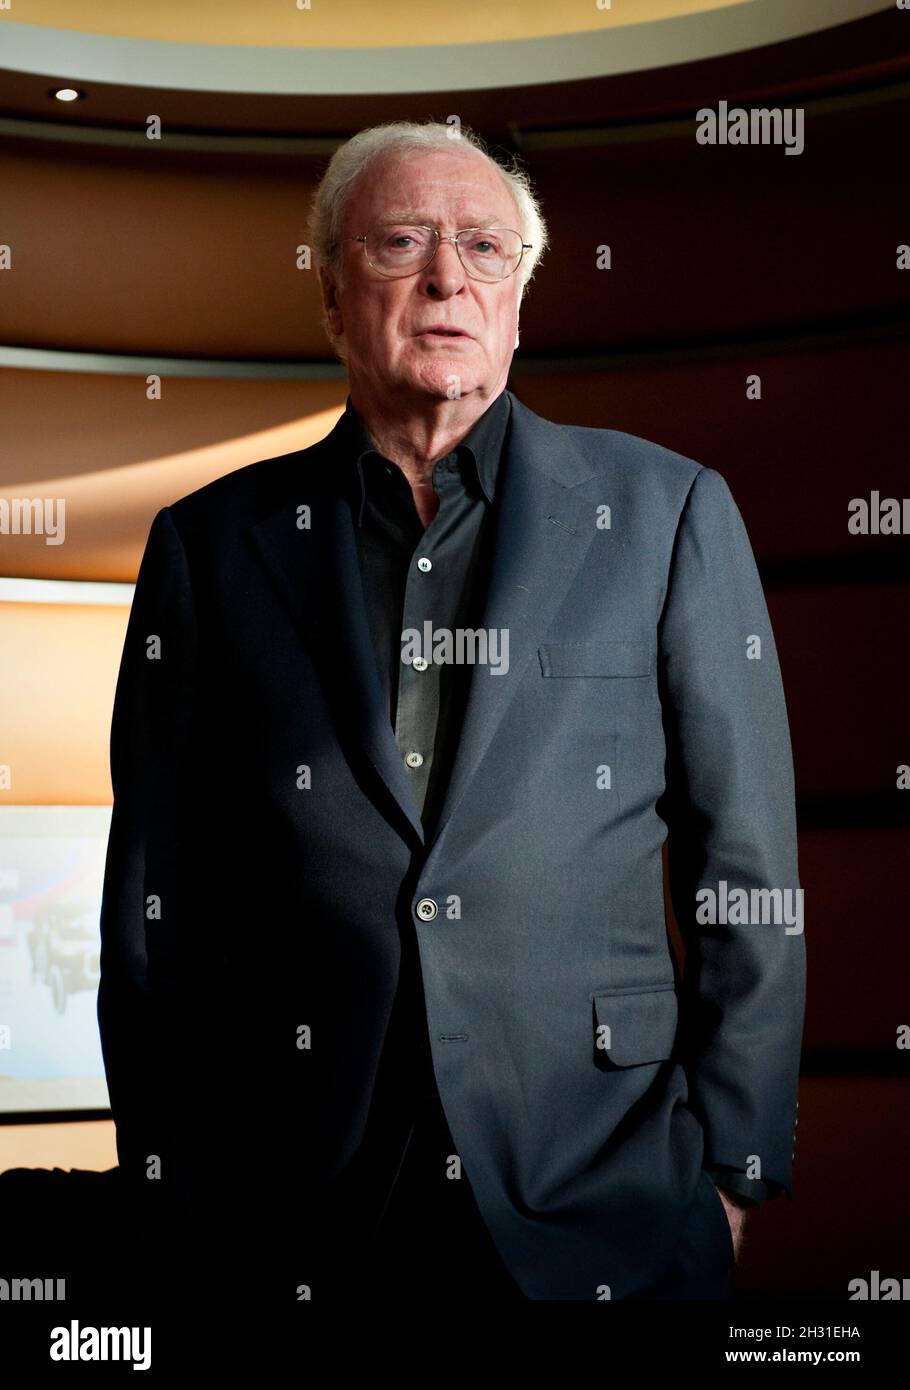 Sir Michael Caine attends the £20 Million Opening of the Galleries of Modern London at the Museum of London, London, 27th May 2010. Stock Photo